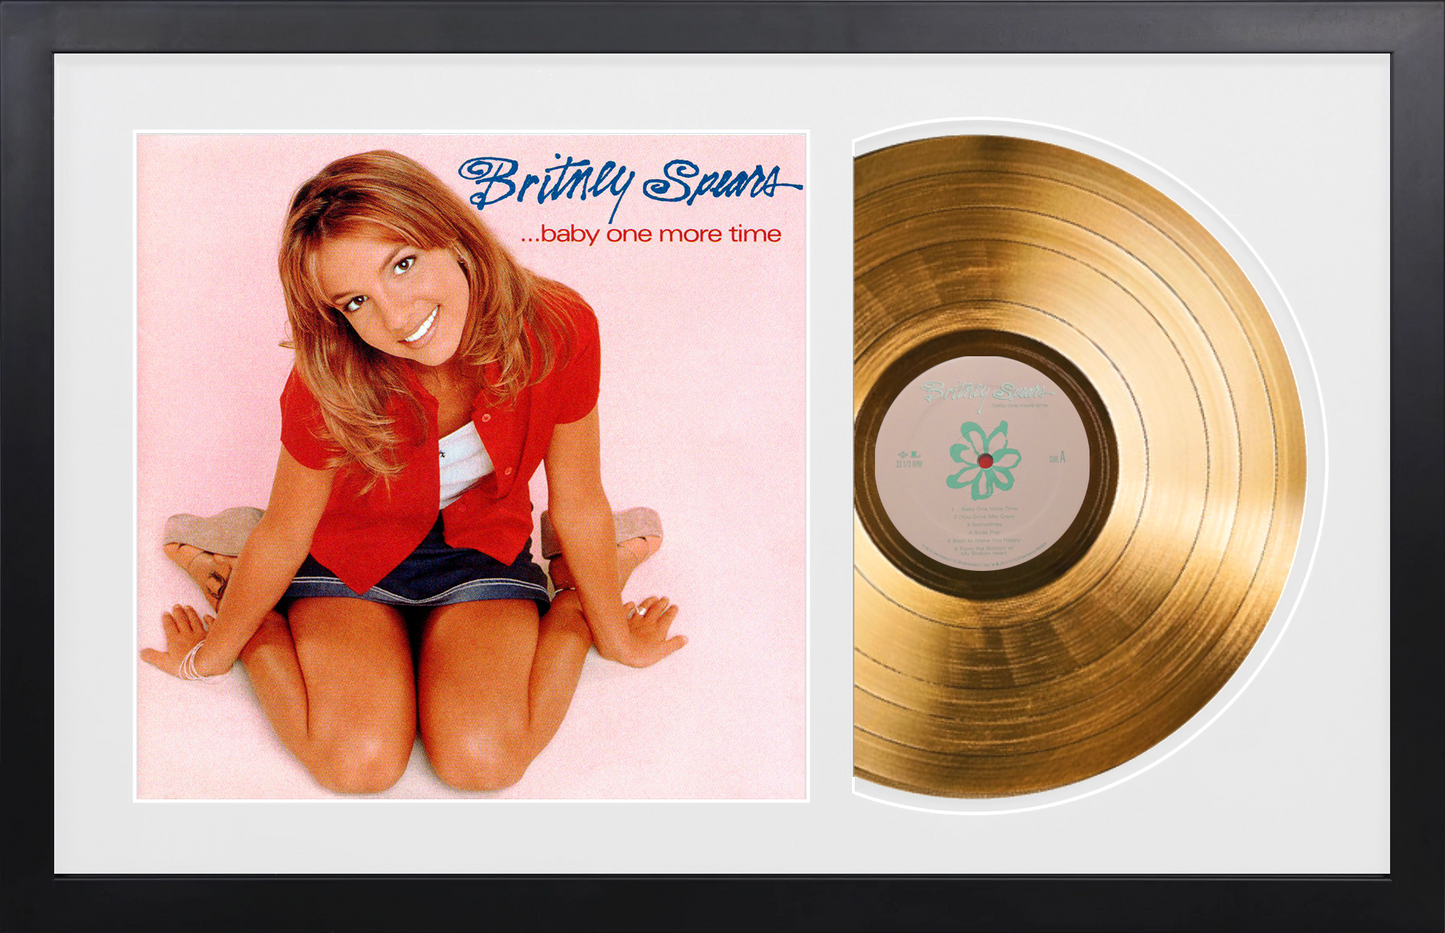 Britney Spears - ...baby one more time -  Rose Gold-Plated, Limited Edition Album